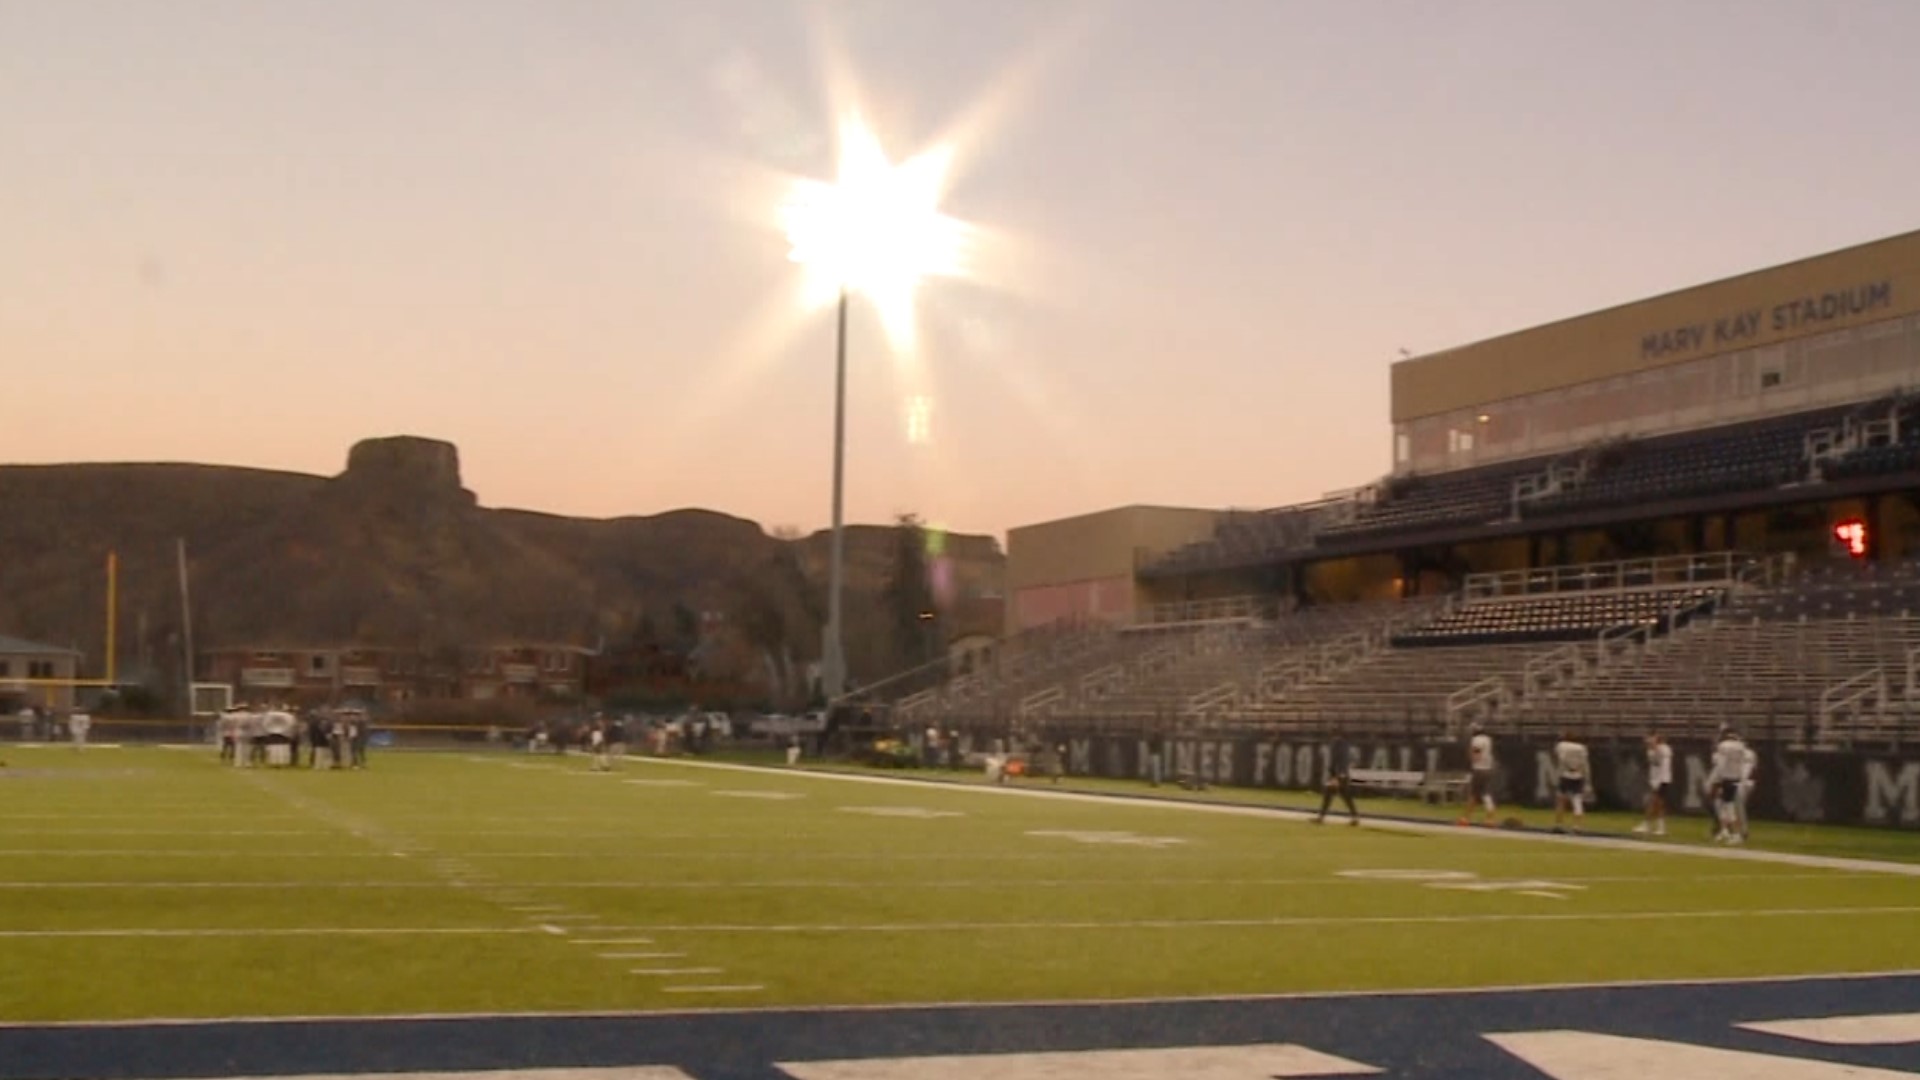 Head coach Pete Sterbick and the No. 1 ranked Colorado School of Mines football team prepare to take on Augustana in the playoffs this Saturday.